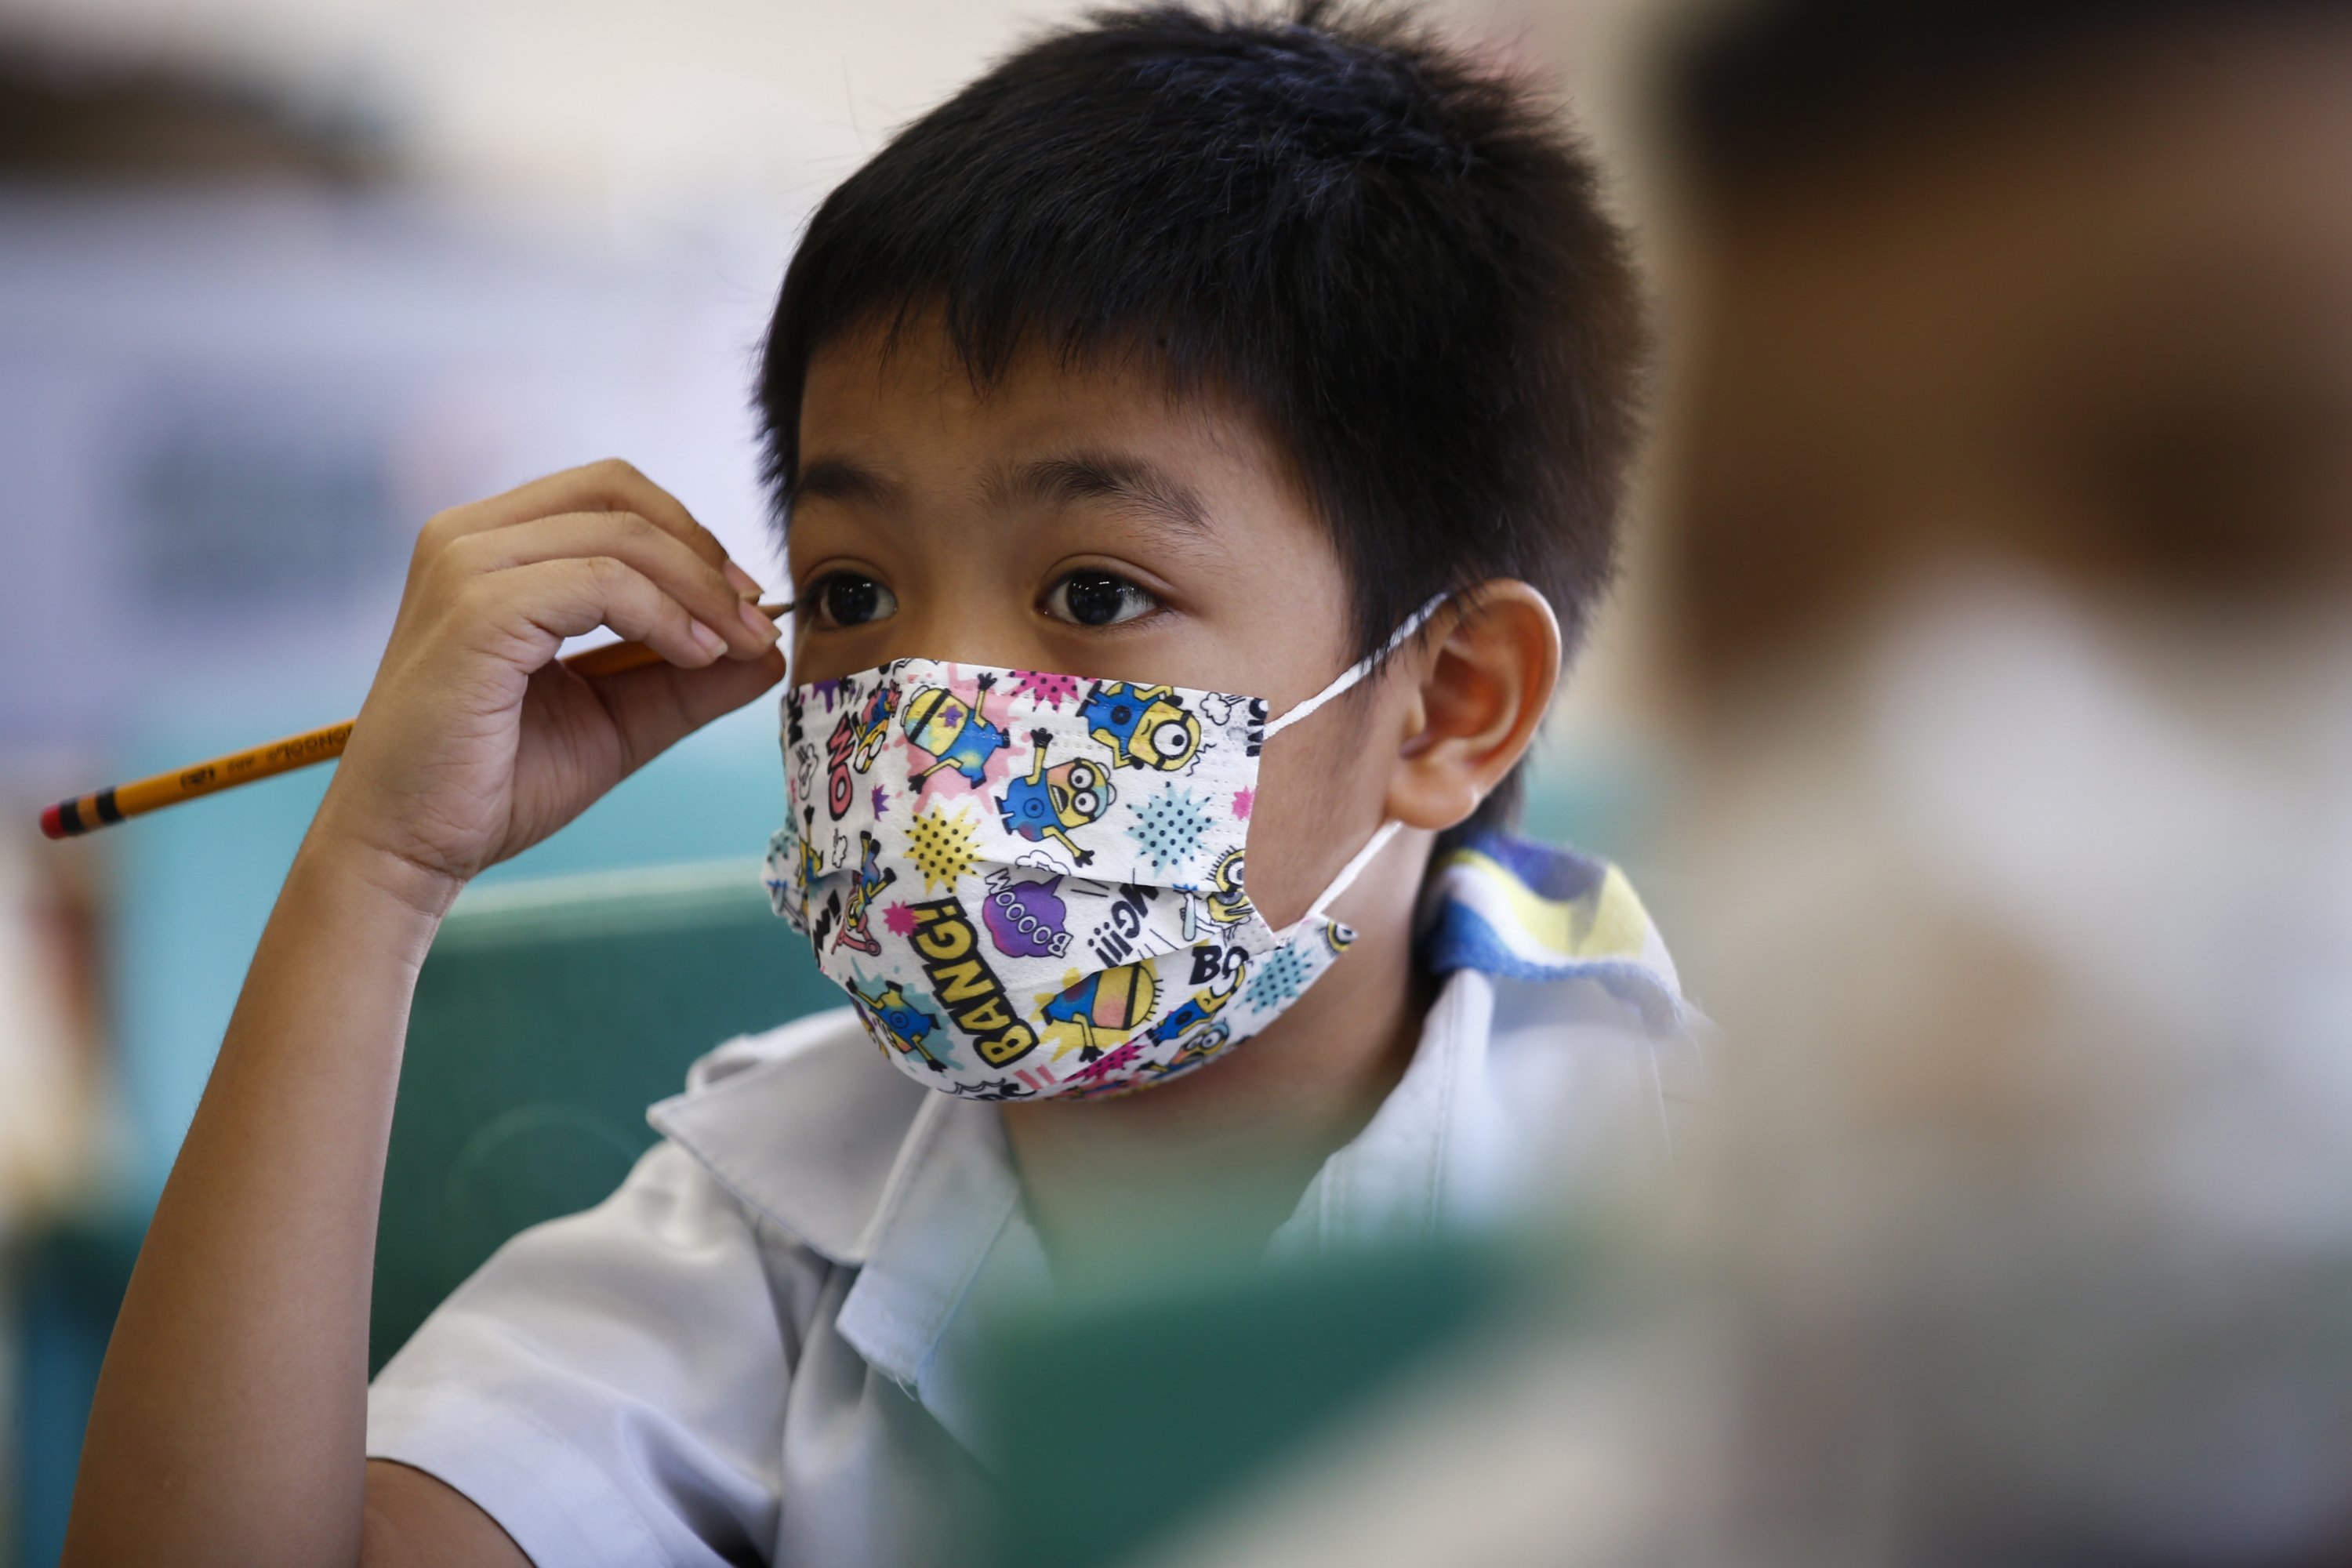  A student attends class at an elementary school in San Juan City, Metro Manila, Philippines, Feb. 10, 2022. (EPA Photo)